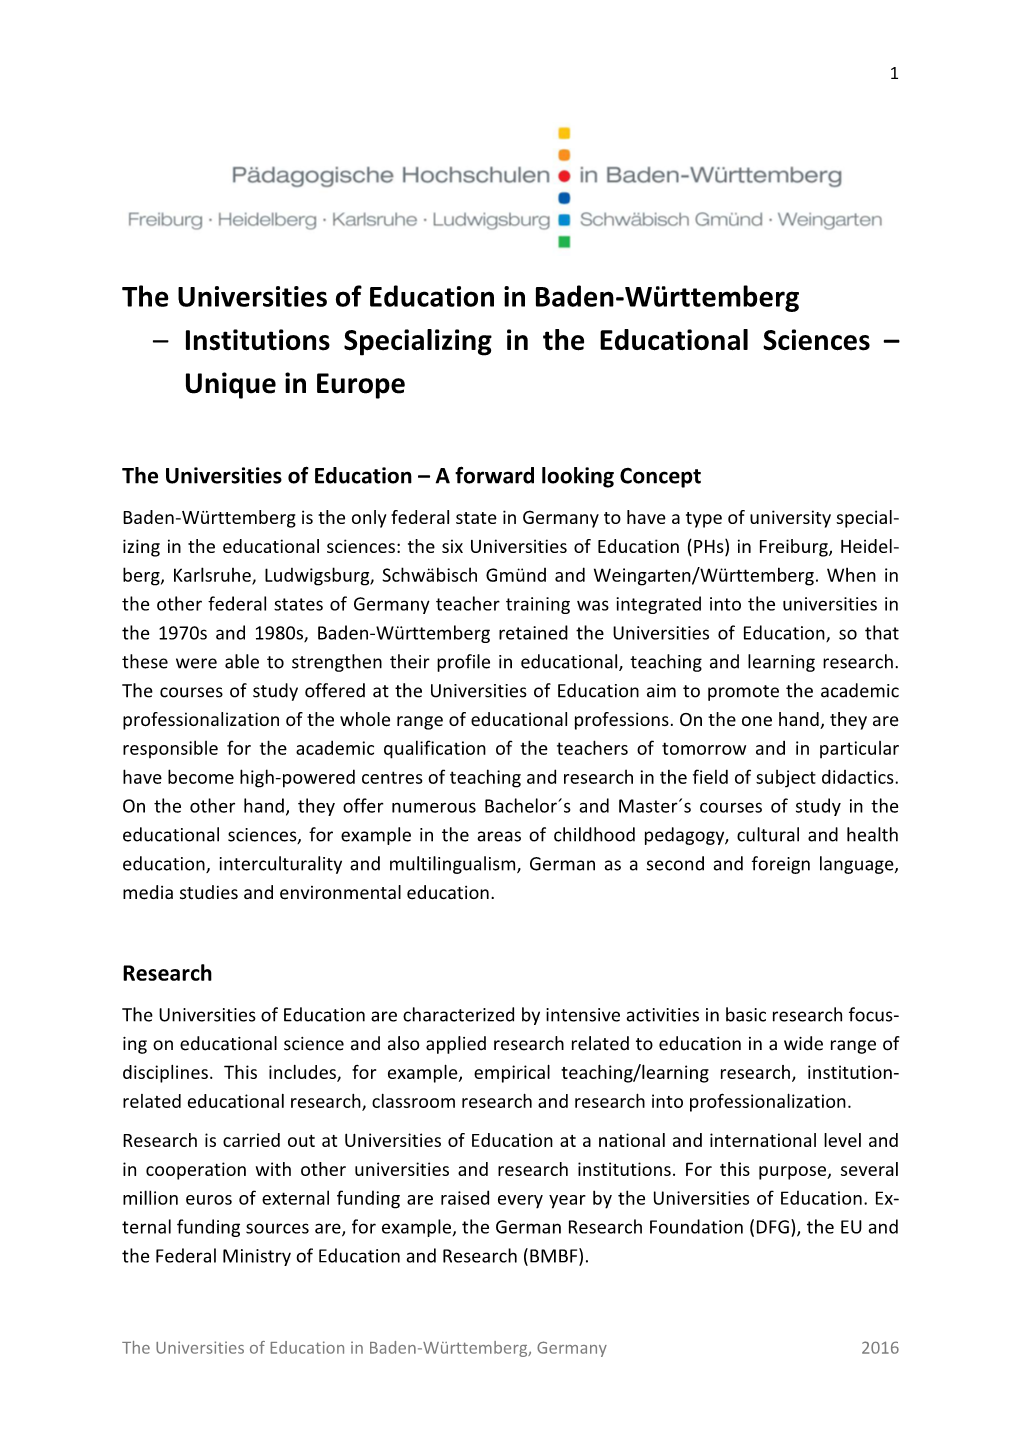 The Universities of Education in Baden-Württemberg – Institutions Specializing in the Educational Sciences – Unique in Europe